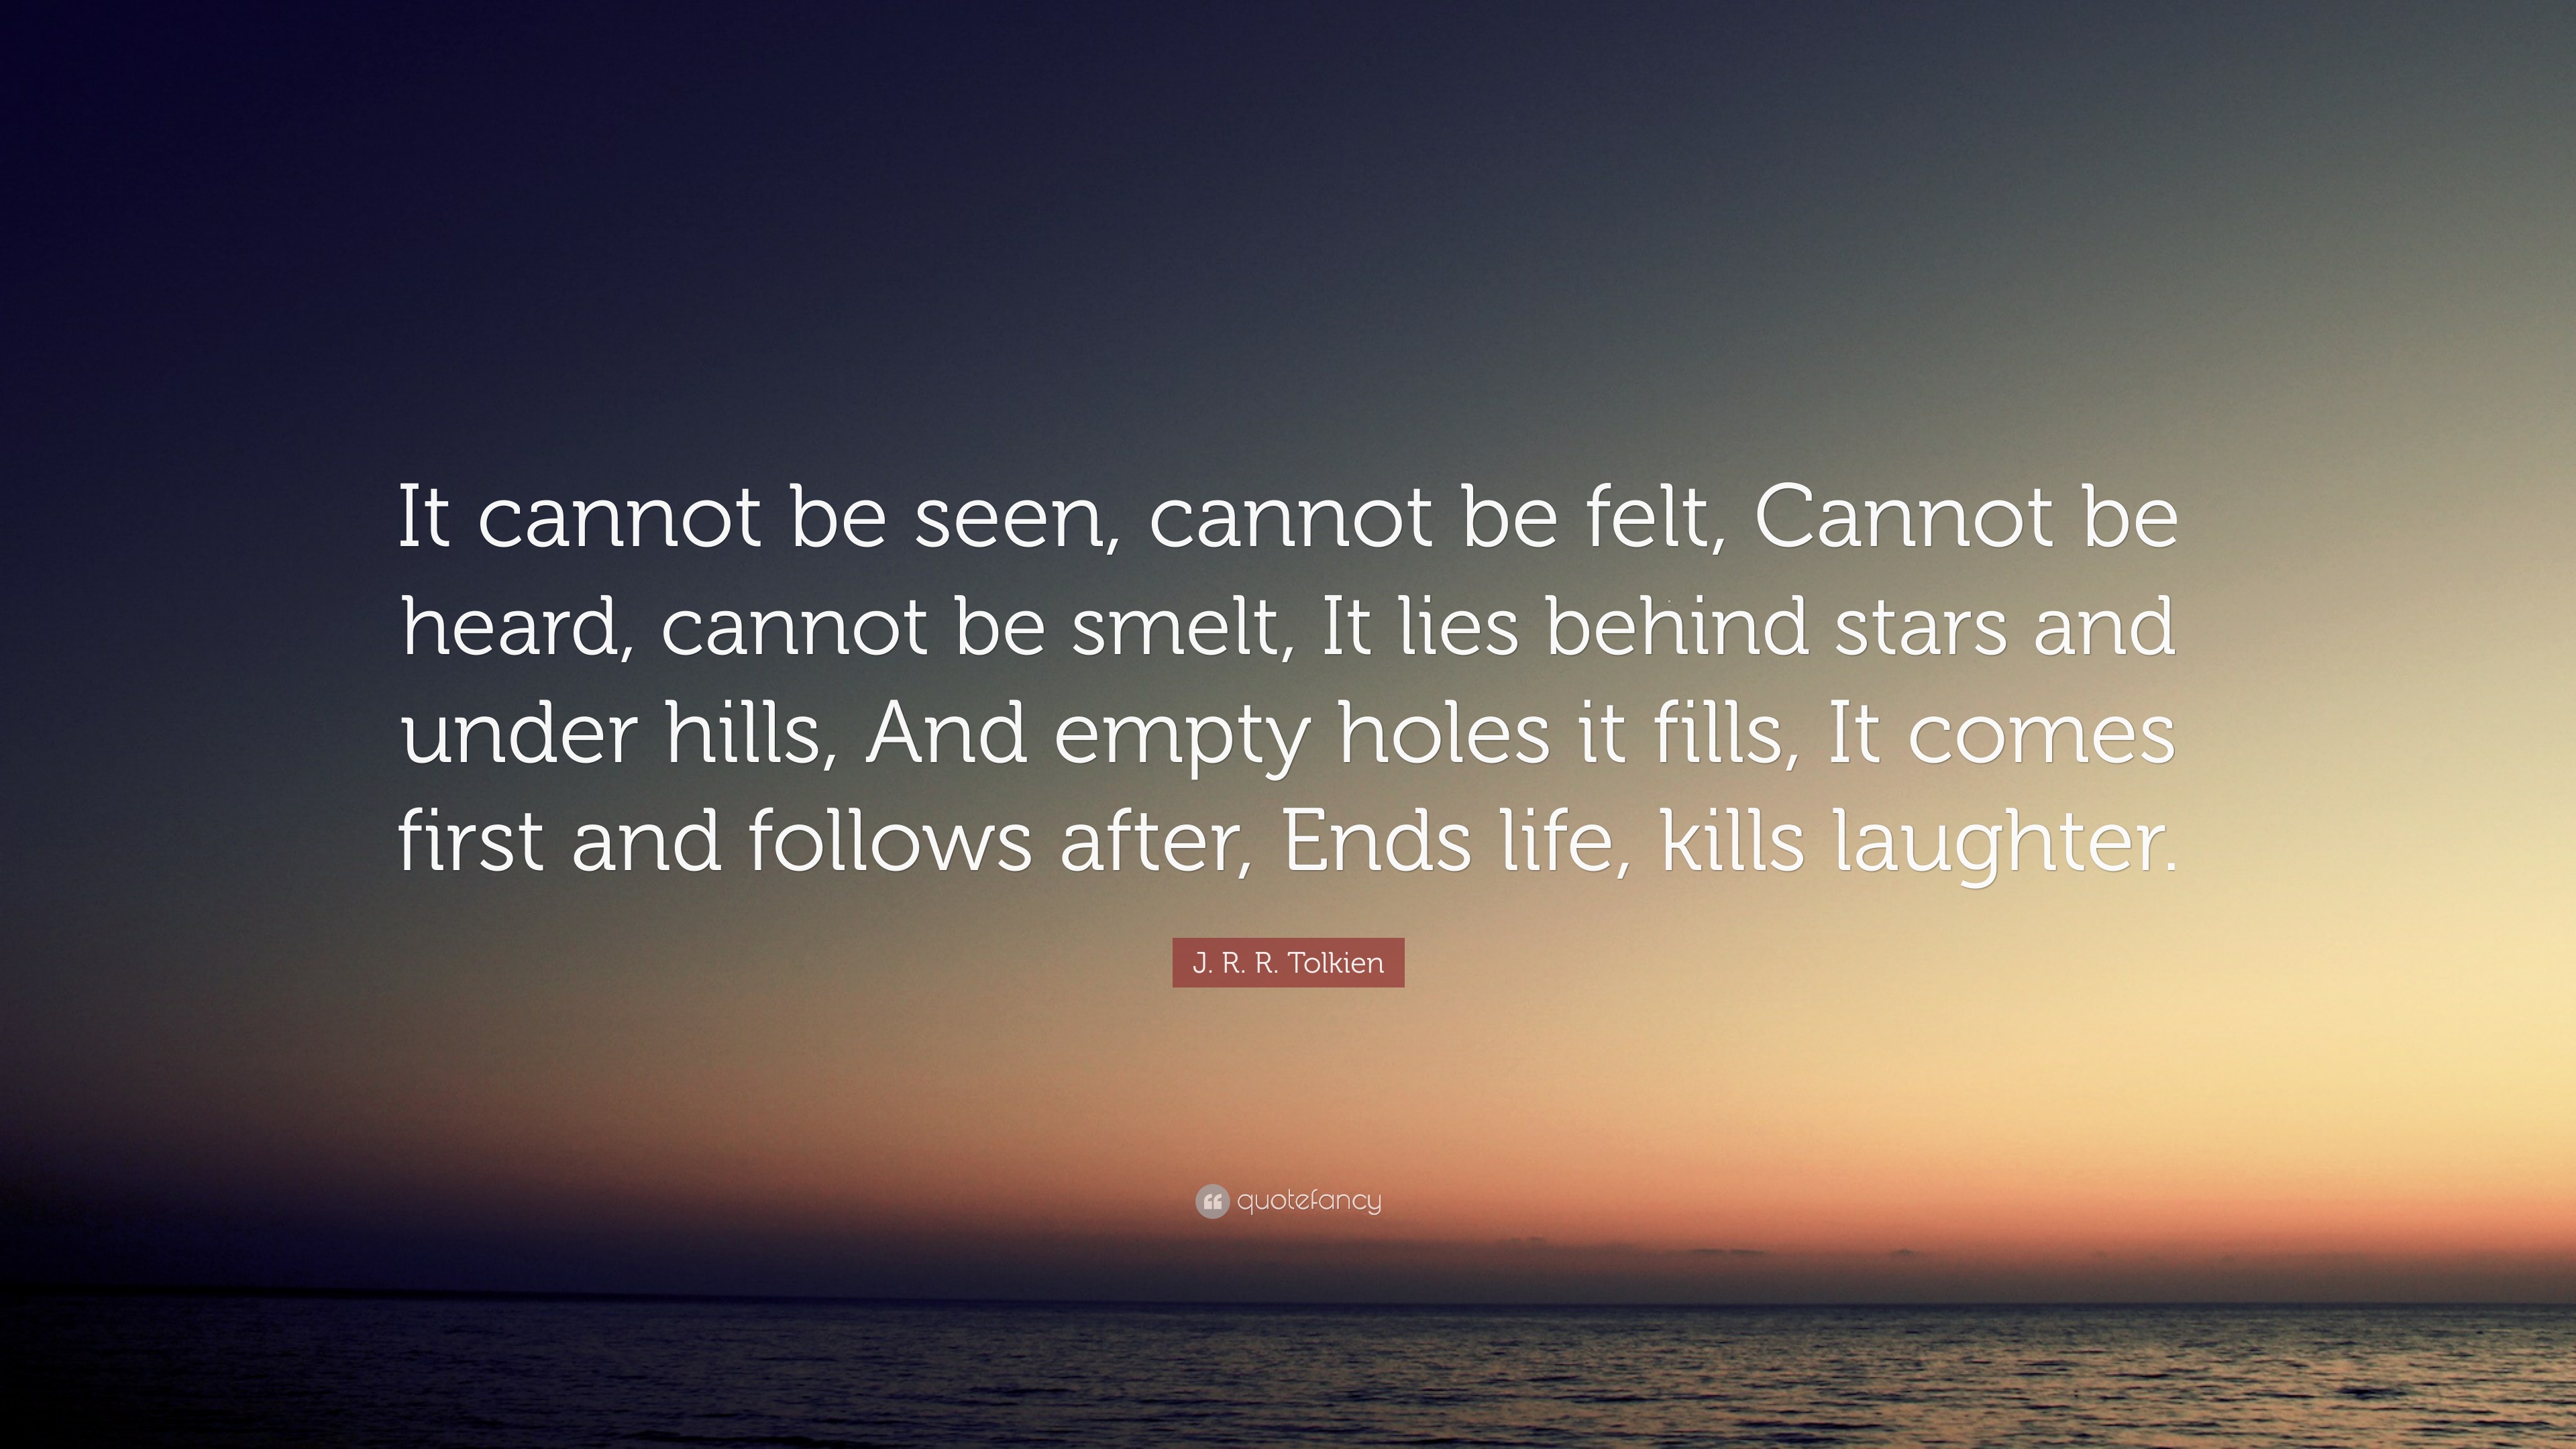 J. R. R. Tolkien Quote: “It cannot be seen, cannot be felt, Cannot be